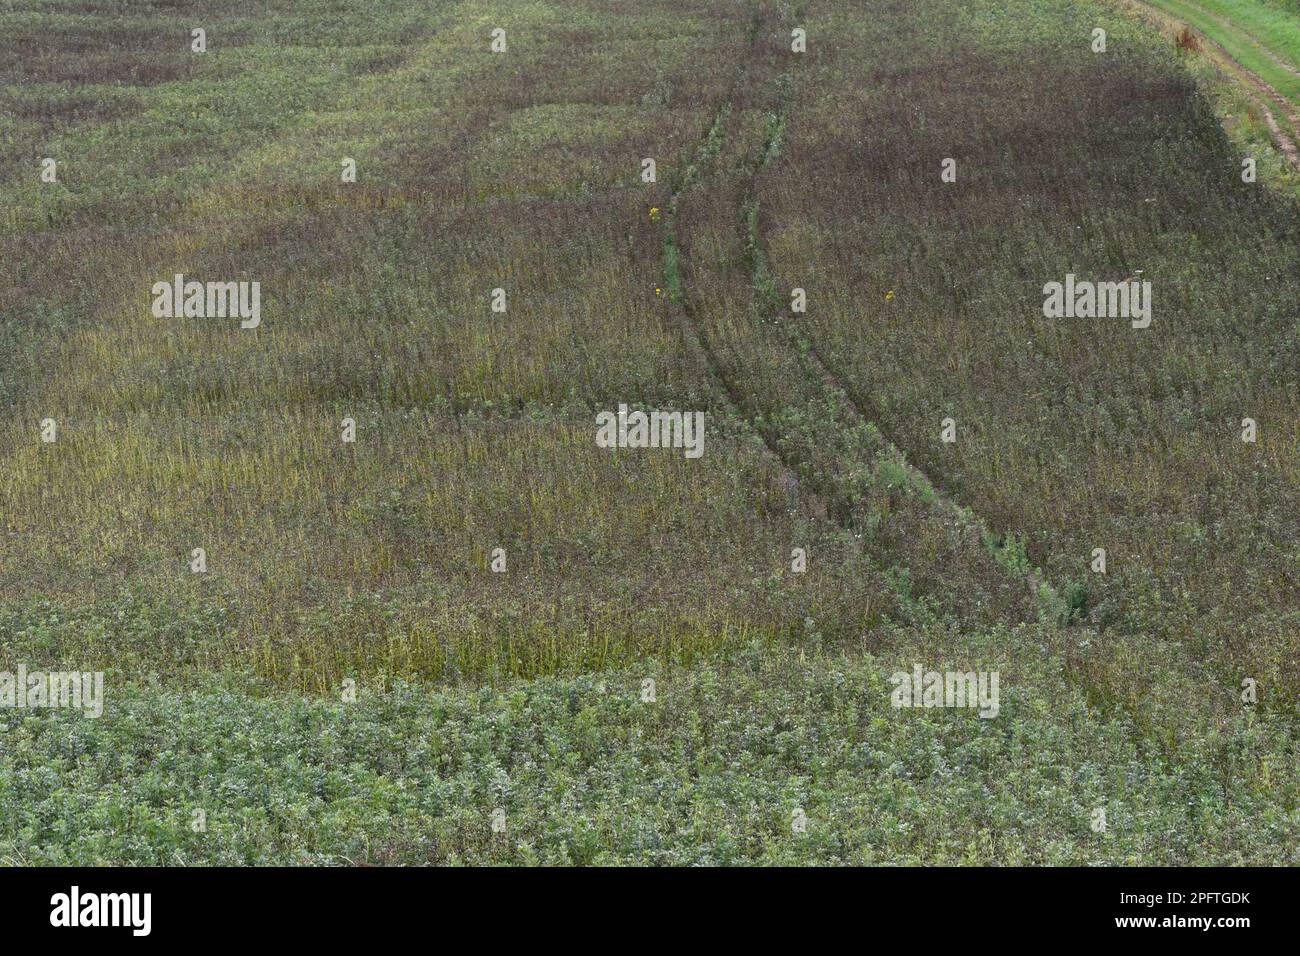 Field bean rust, Uromyces vicia-fabae, damage to crop of field beans, Berkshire, England, United Kingdom Stock Photo